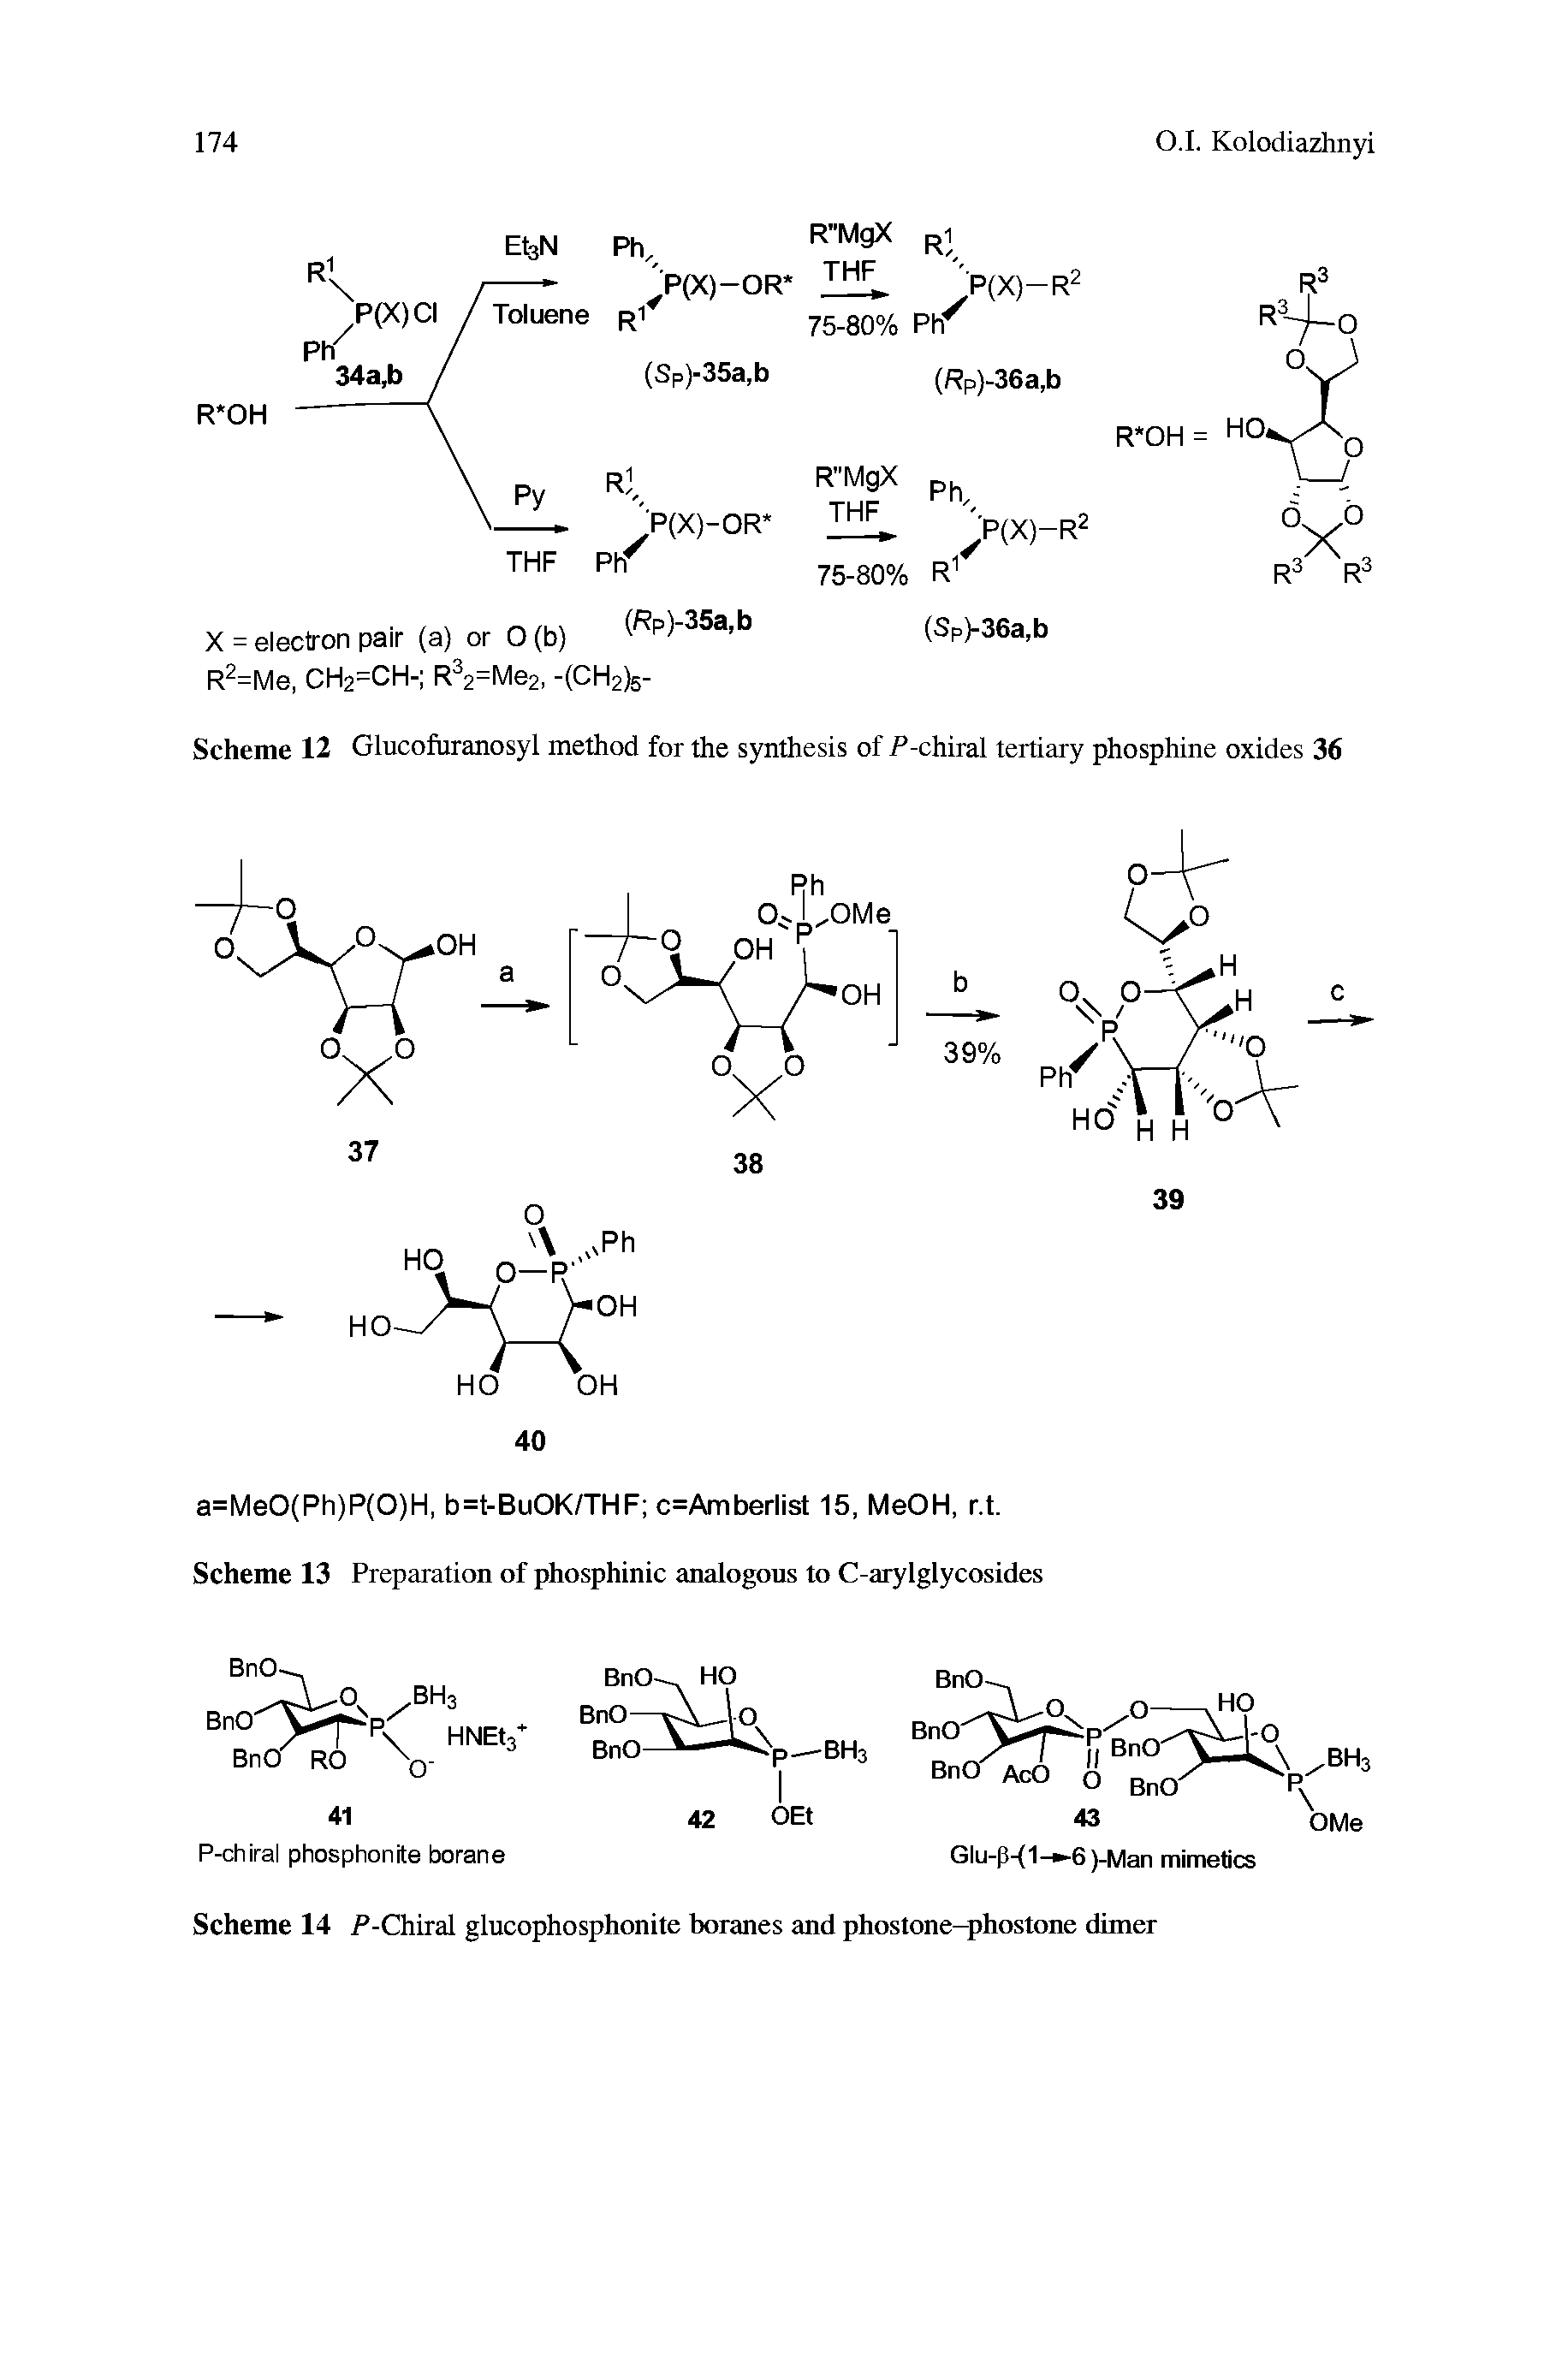 Scheme 12 Glucofuranosyl method for the synthesis of P-chiral tertiary phosphine oxides 36...